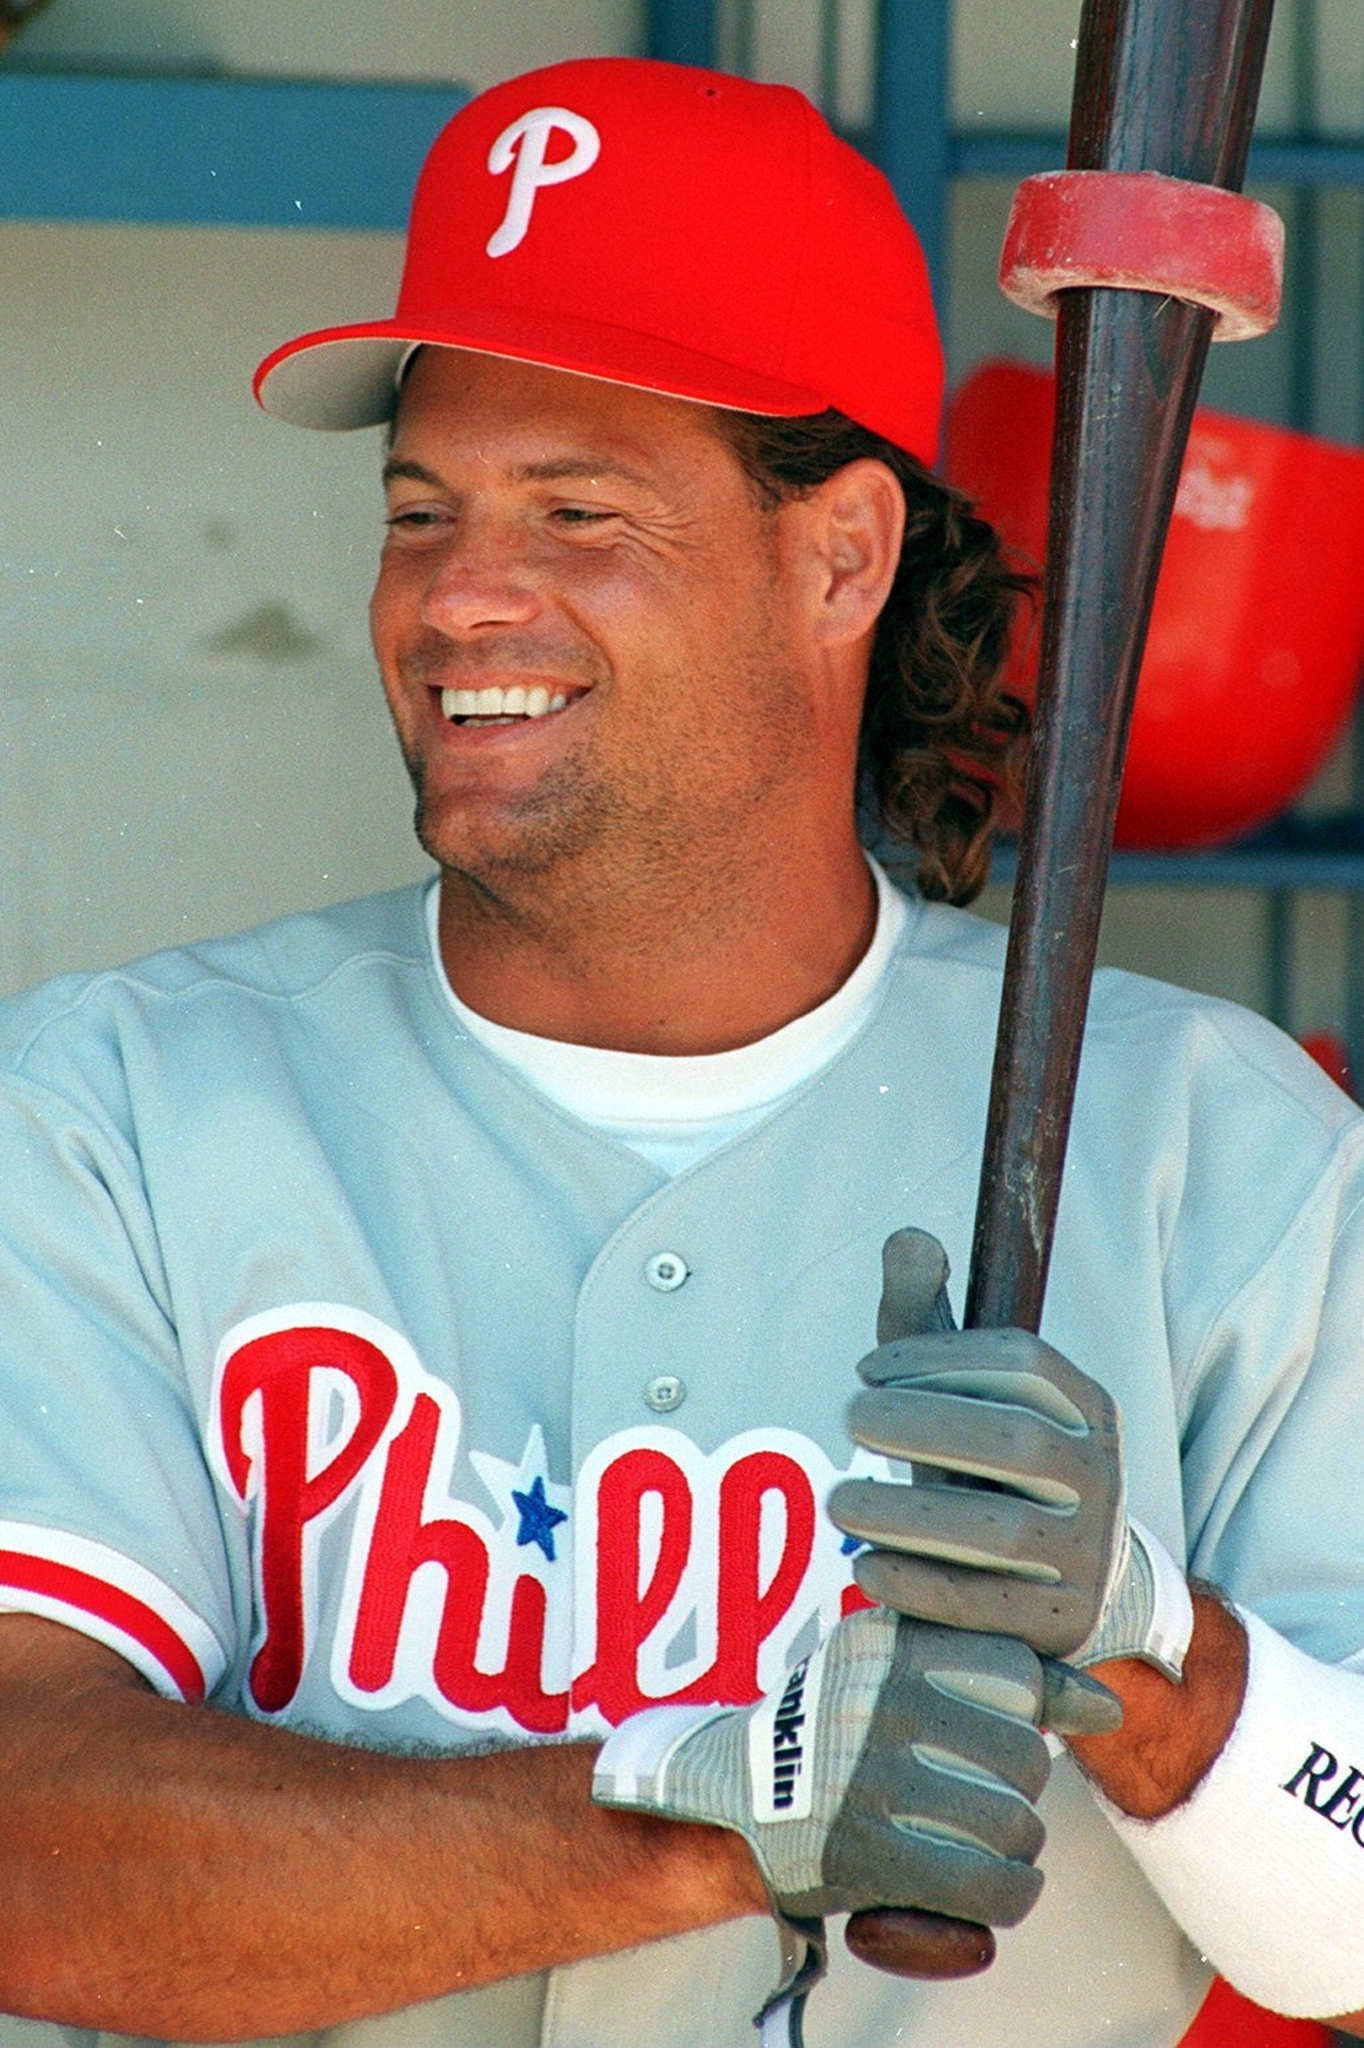 Darren Daulton Was the Heartbeat of a Rowdy Phillies Bunch - The